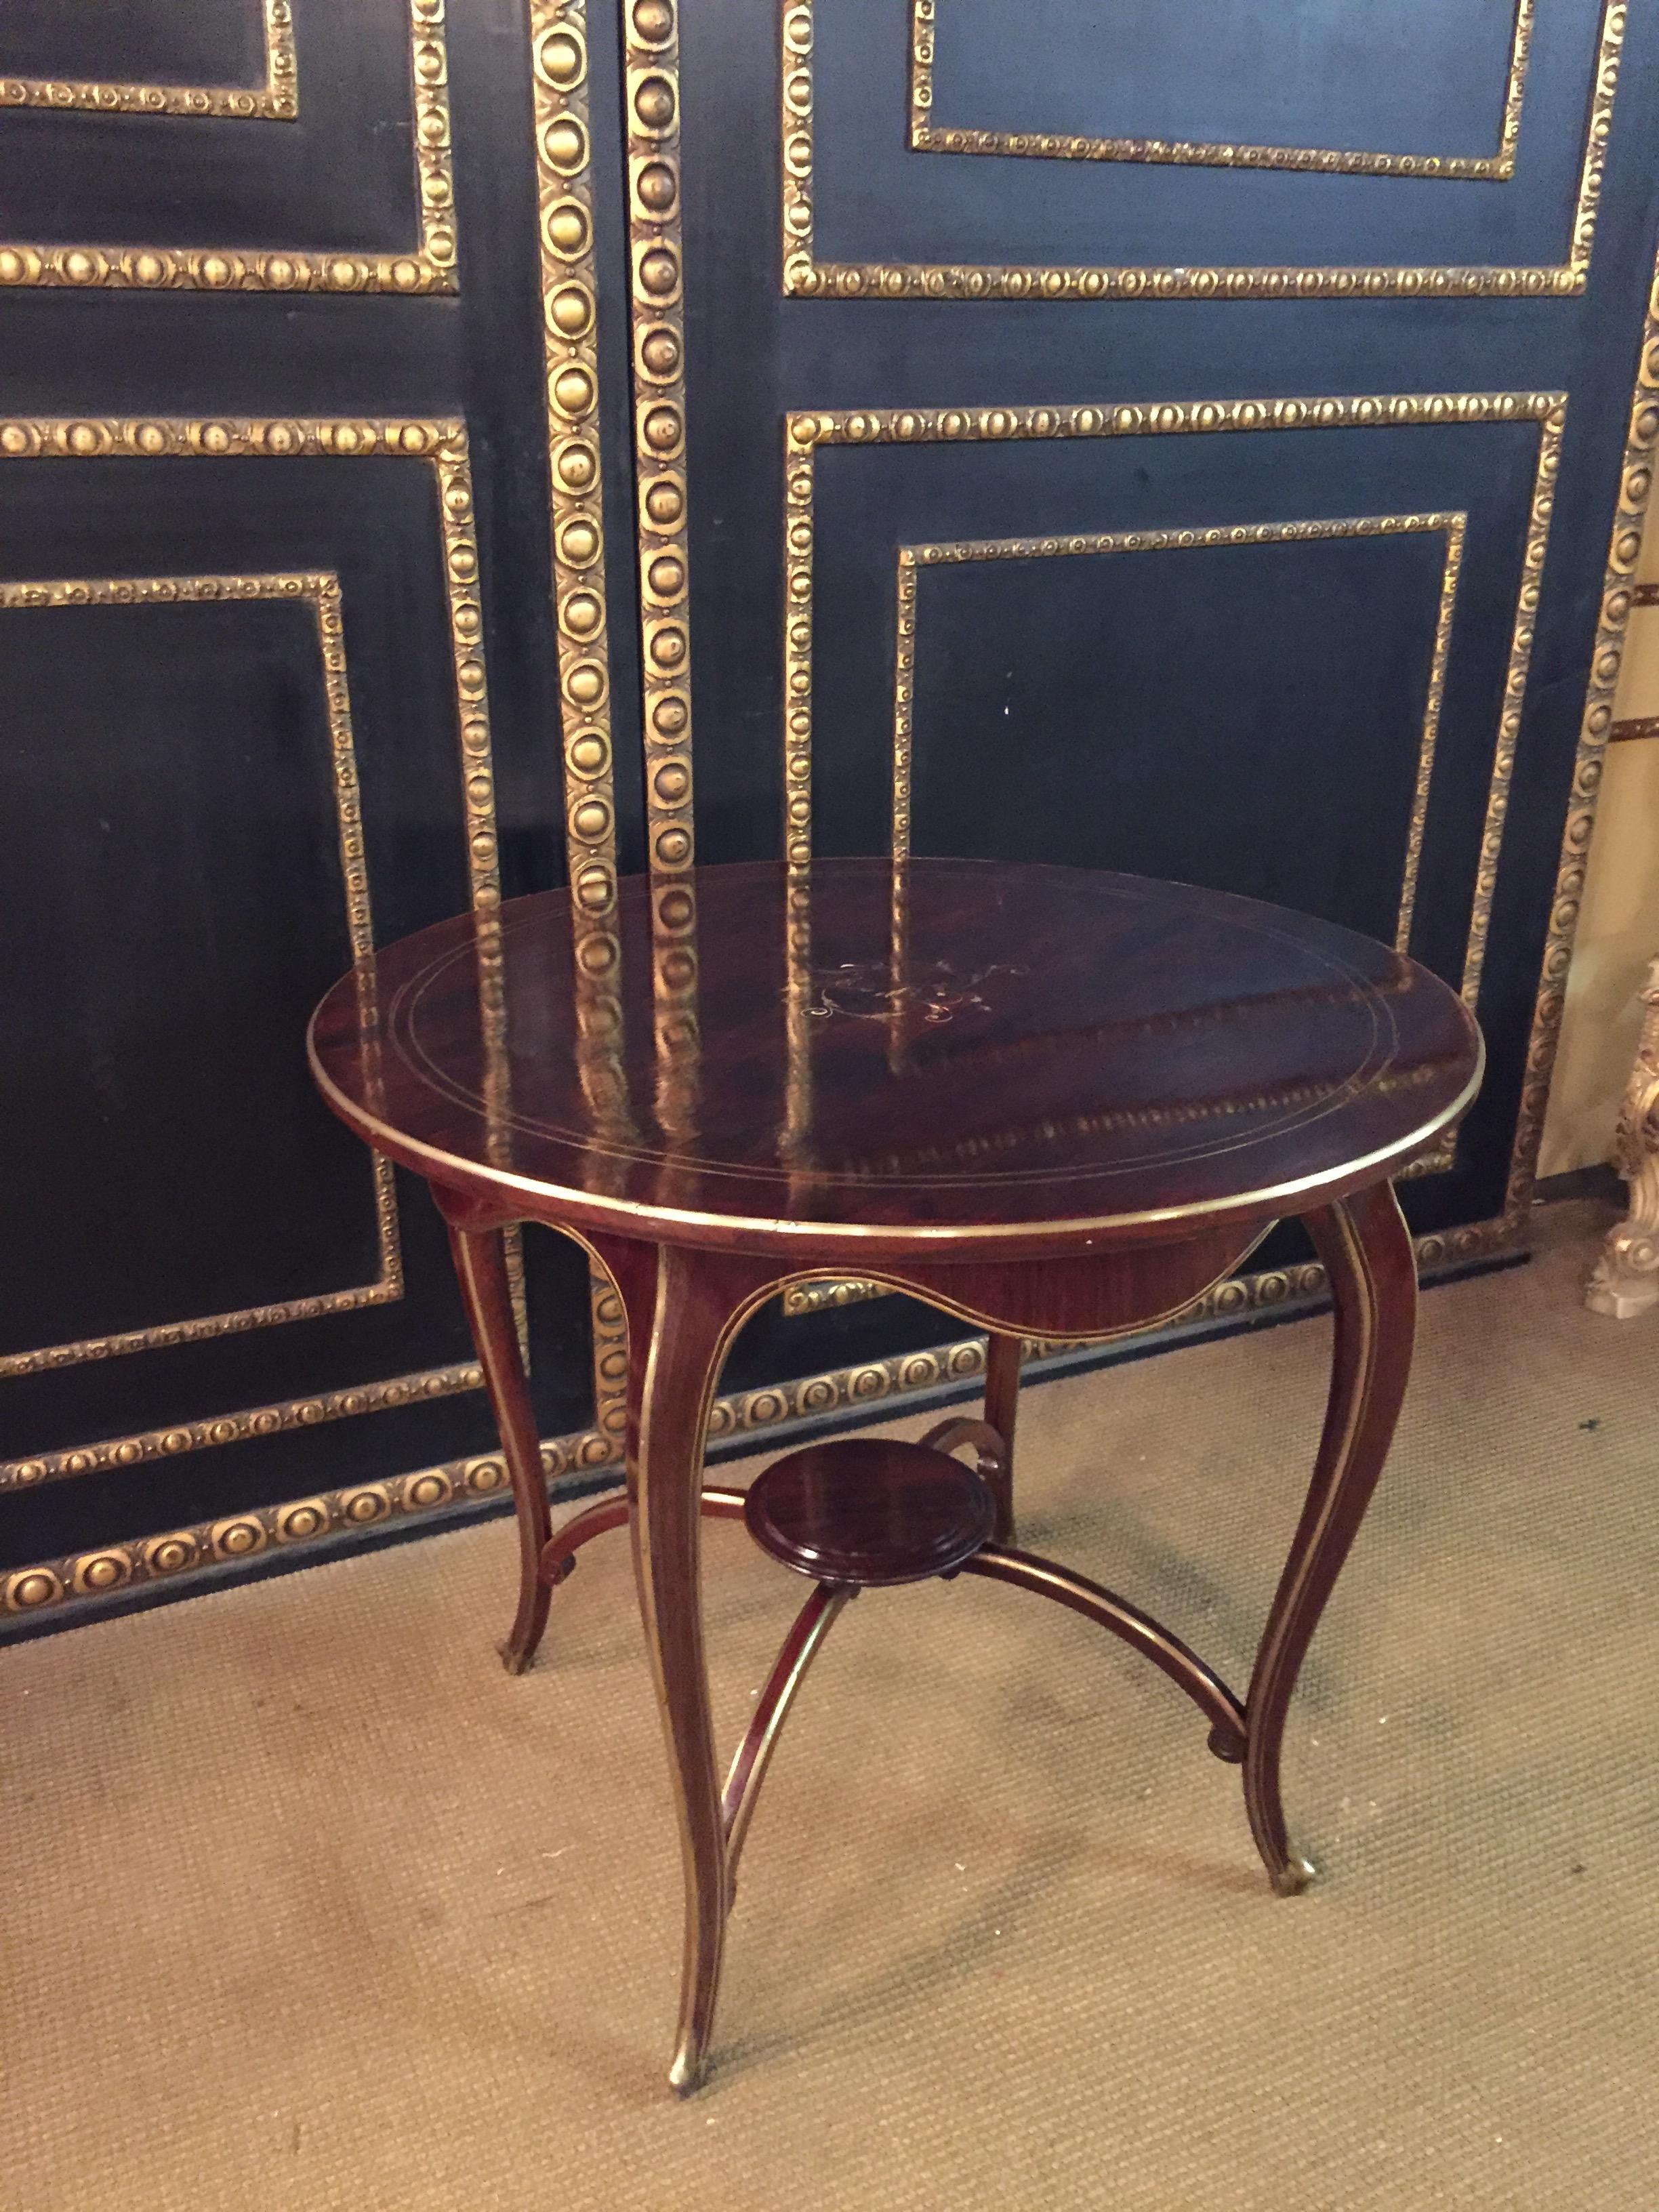 Inlay Antique Biedermeier Table Mahogany Inlaid with Mother of Pearl inlay 1870 For Sale